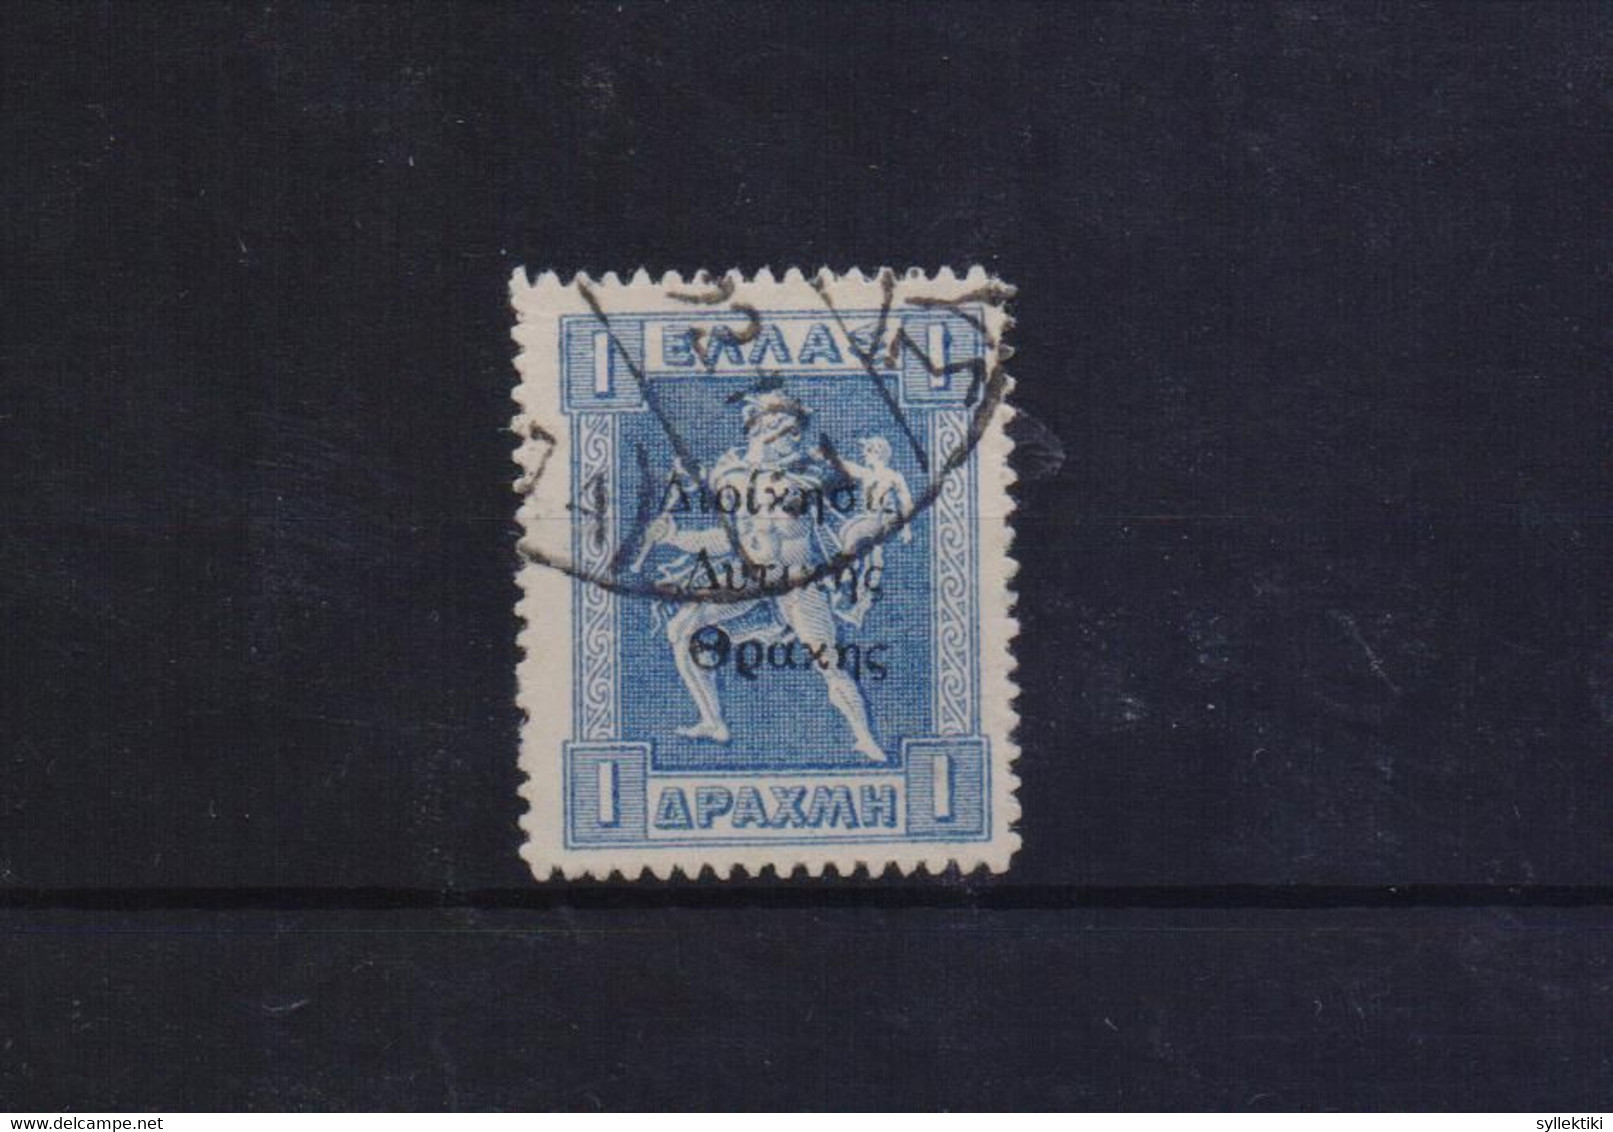 GREECE 1920 THRACE ADMINISTRATION 1 DRACHMA USED STAMP HELLAS CAT. No 78 - Thrace